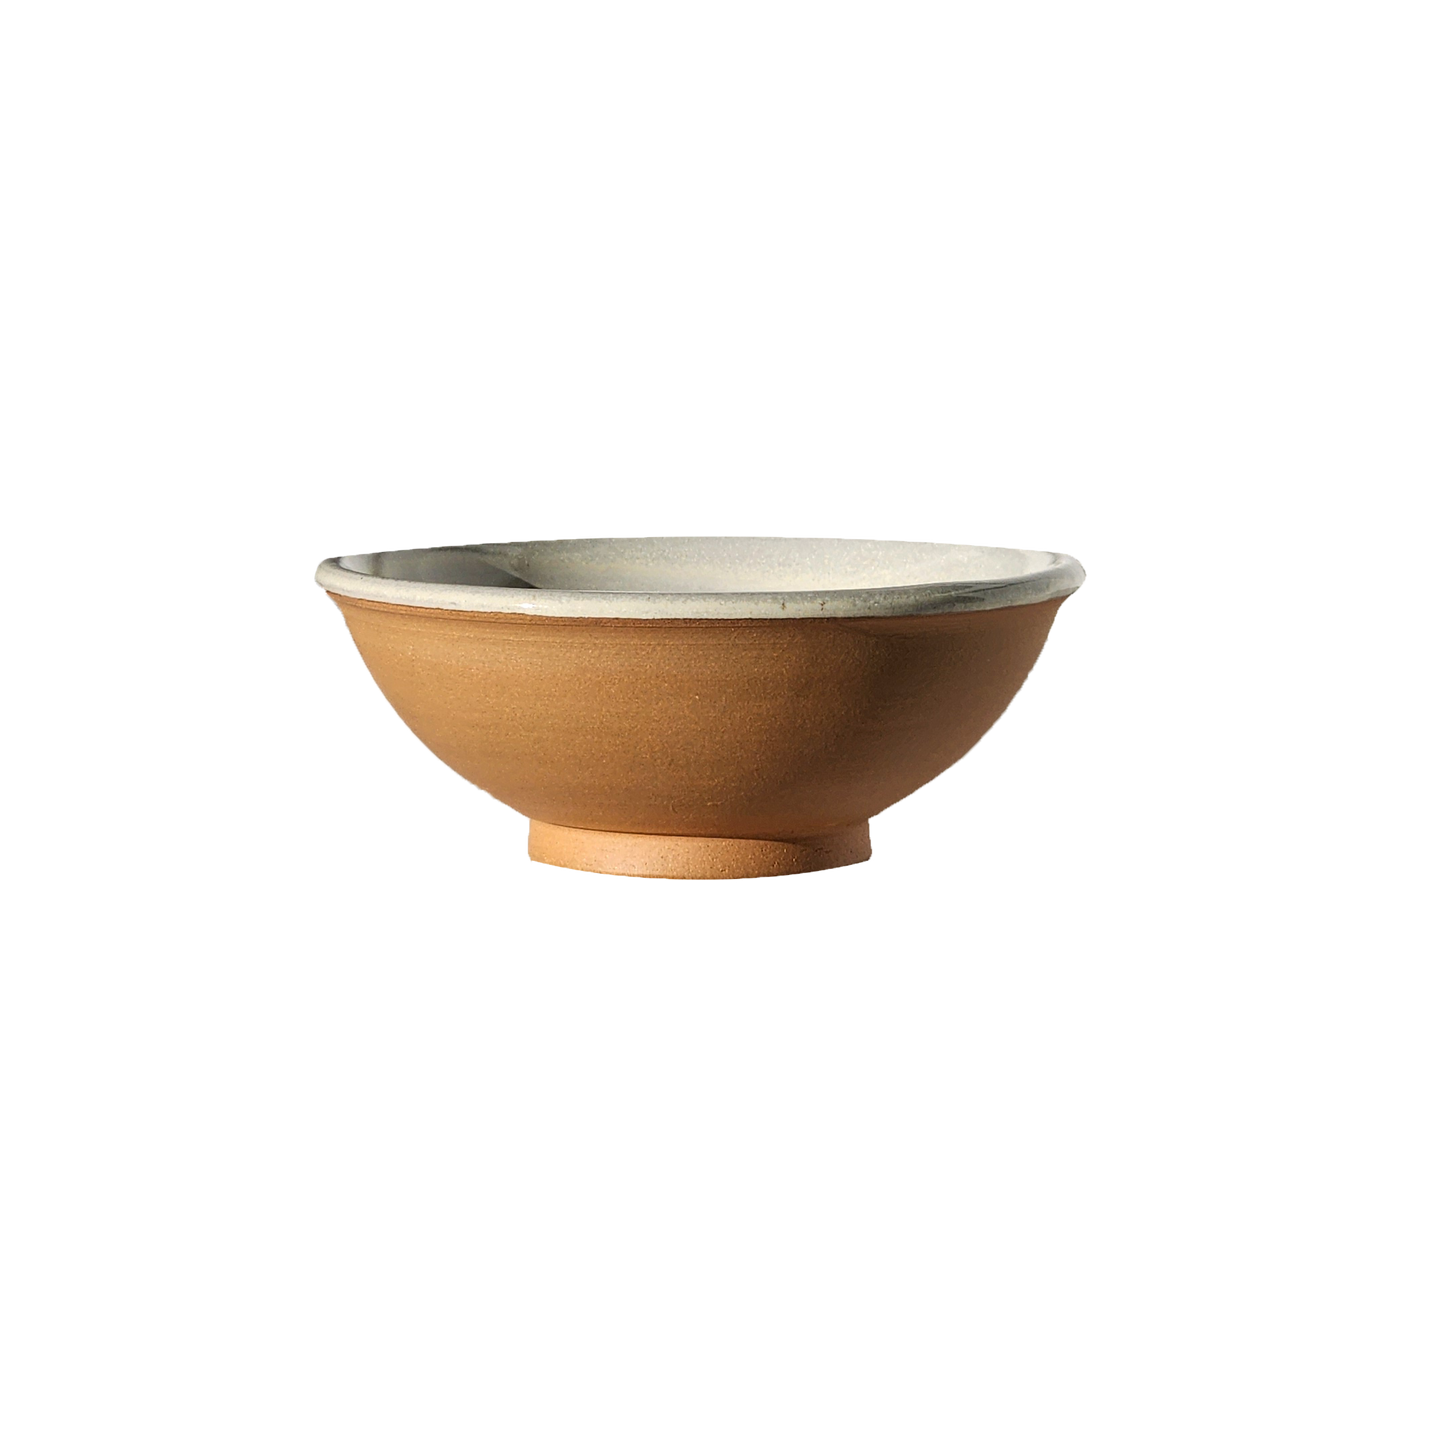 Image: A small mixing bowl in a natural, unglazed finish, offering a capacity of 2.25 cups. Ideal for ingredients, snacks, or condiments, this bowl exudes rustic charm and simplicity in your kitchen.